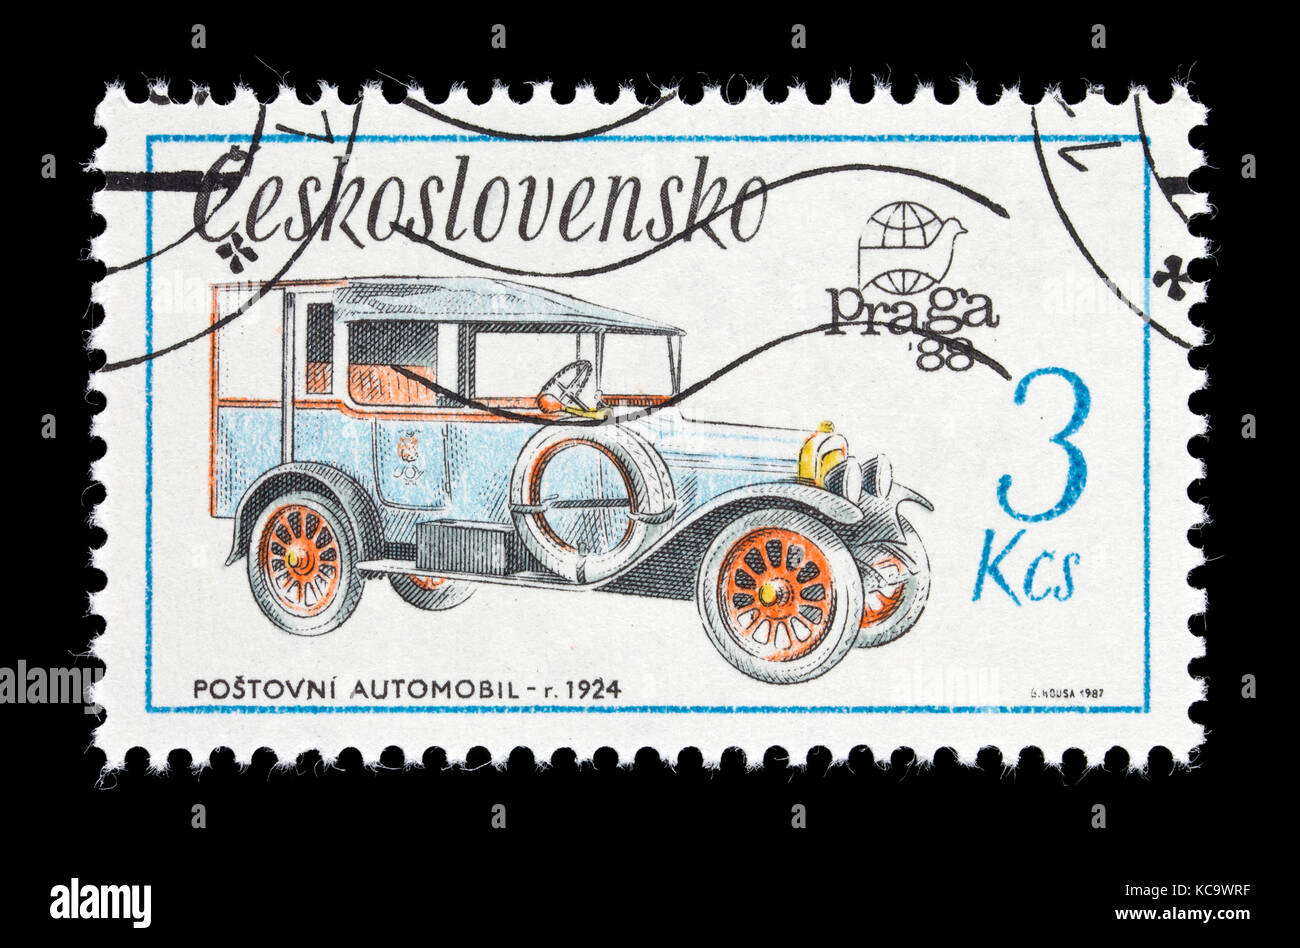 Postage stamp from Czechoslovakia depicting a 1924 postal van. Stock Photo